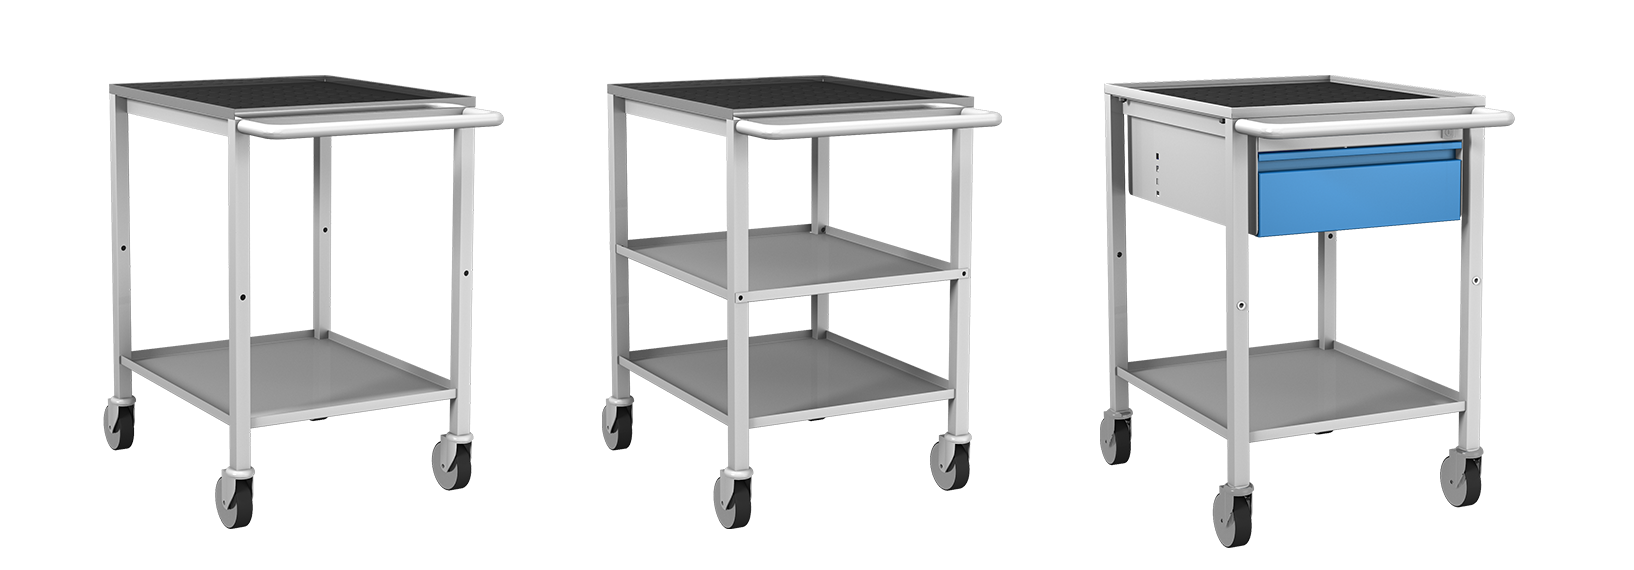 Service trolley with shelves